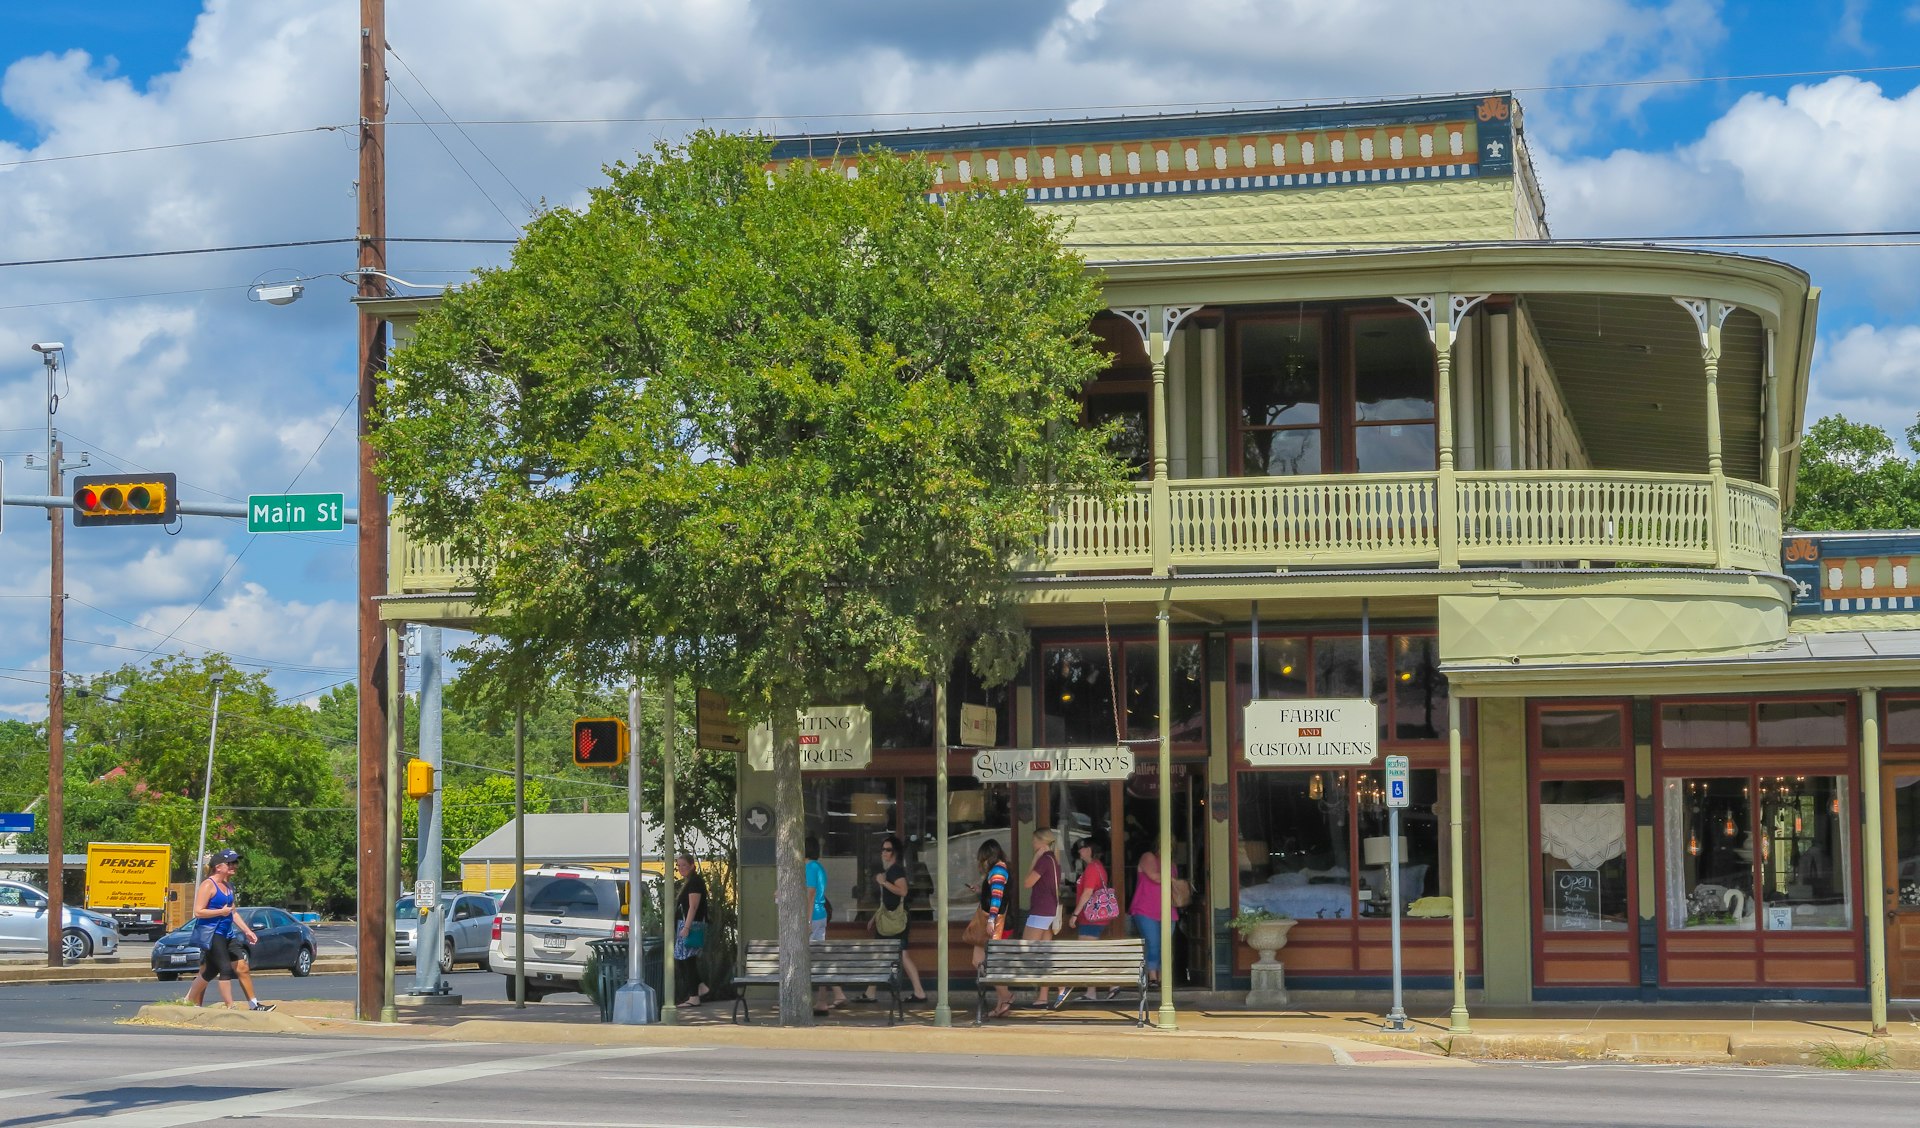 Hoerster Building in Fredericksburg Texas is a limestone Victorian commercial structure built around 1900